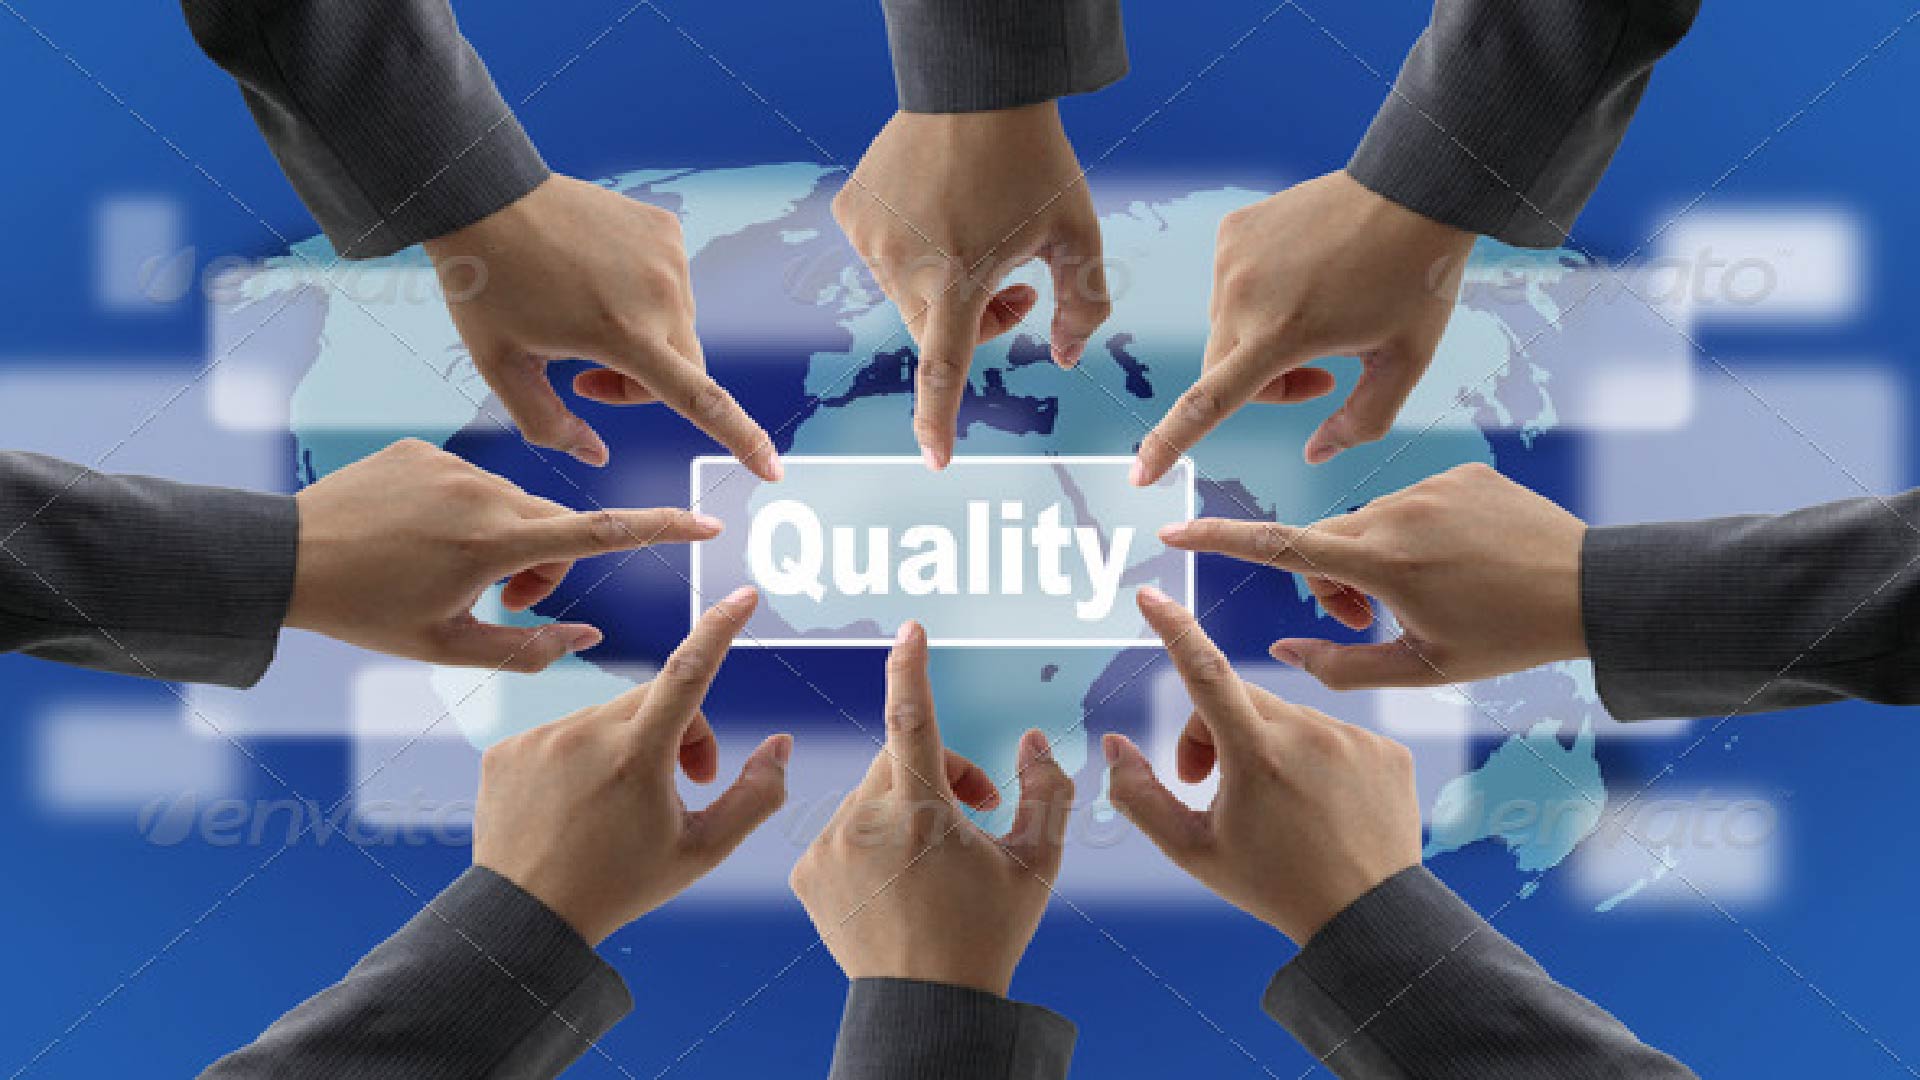 Why Choose Ross Quality?